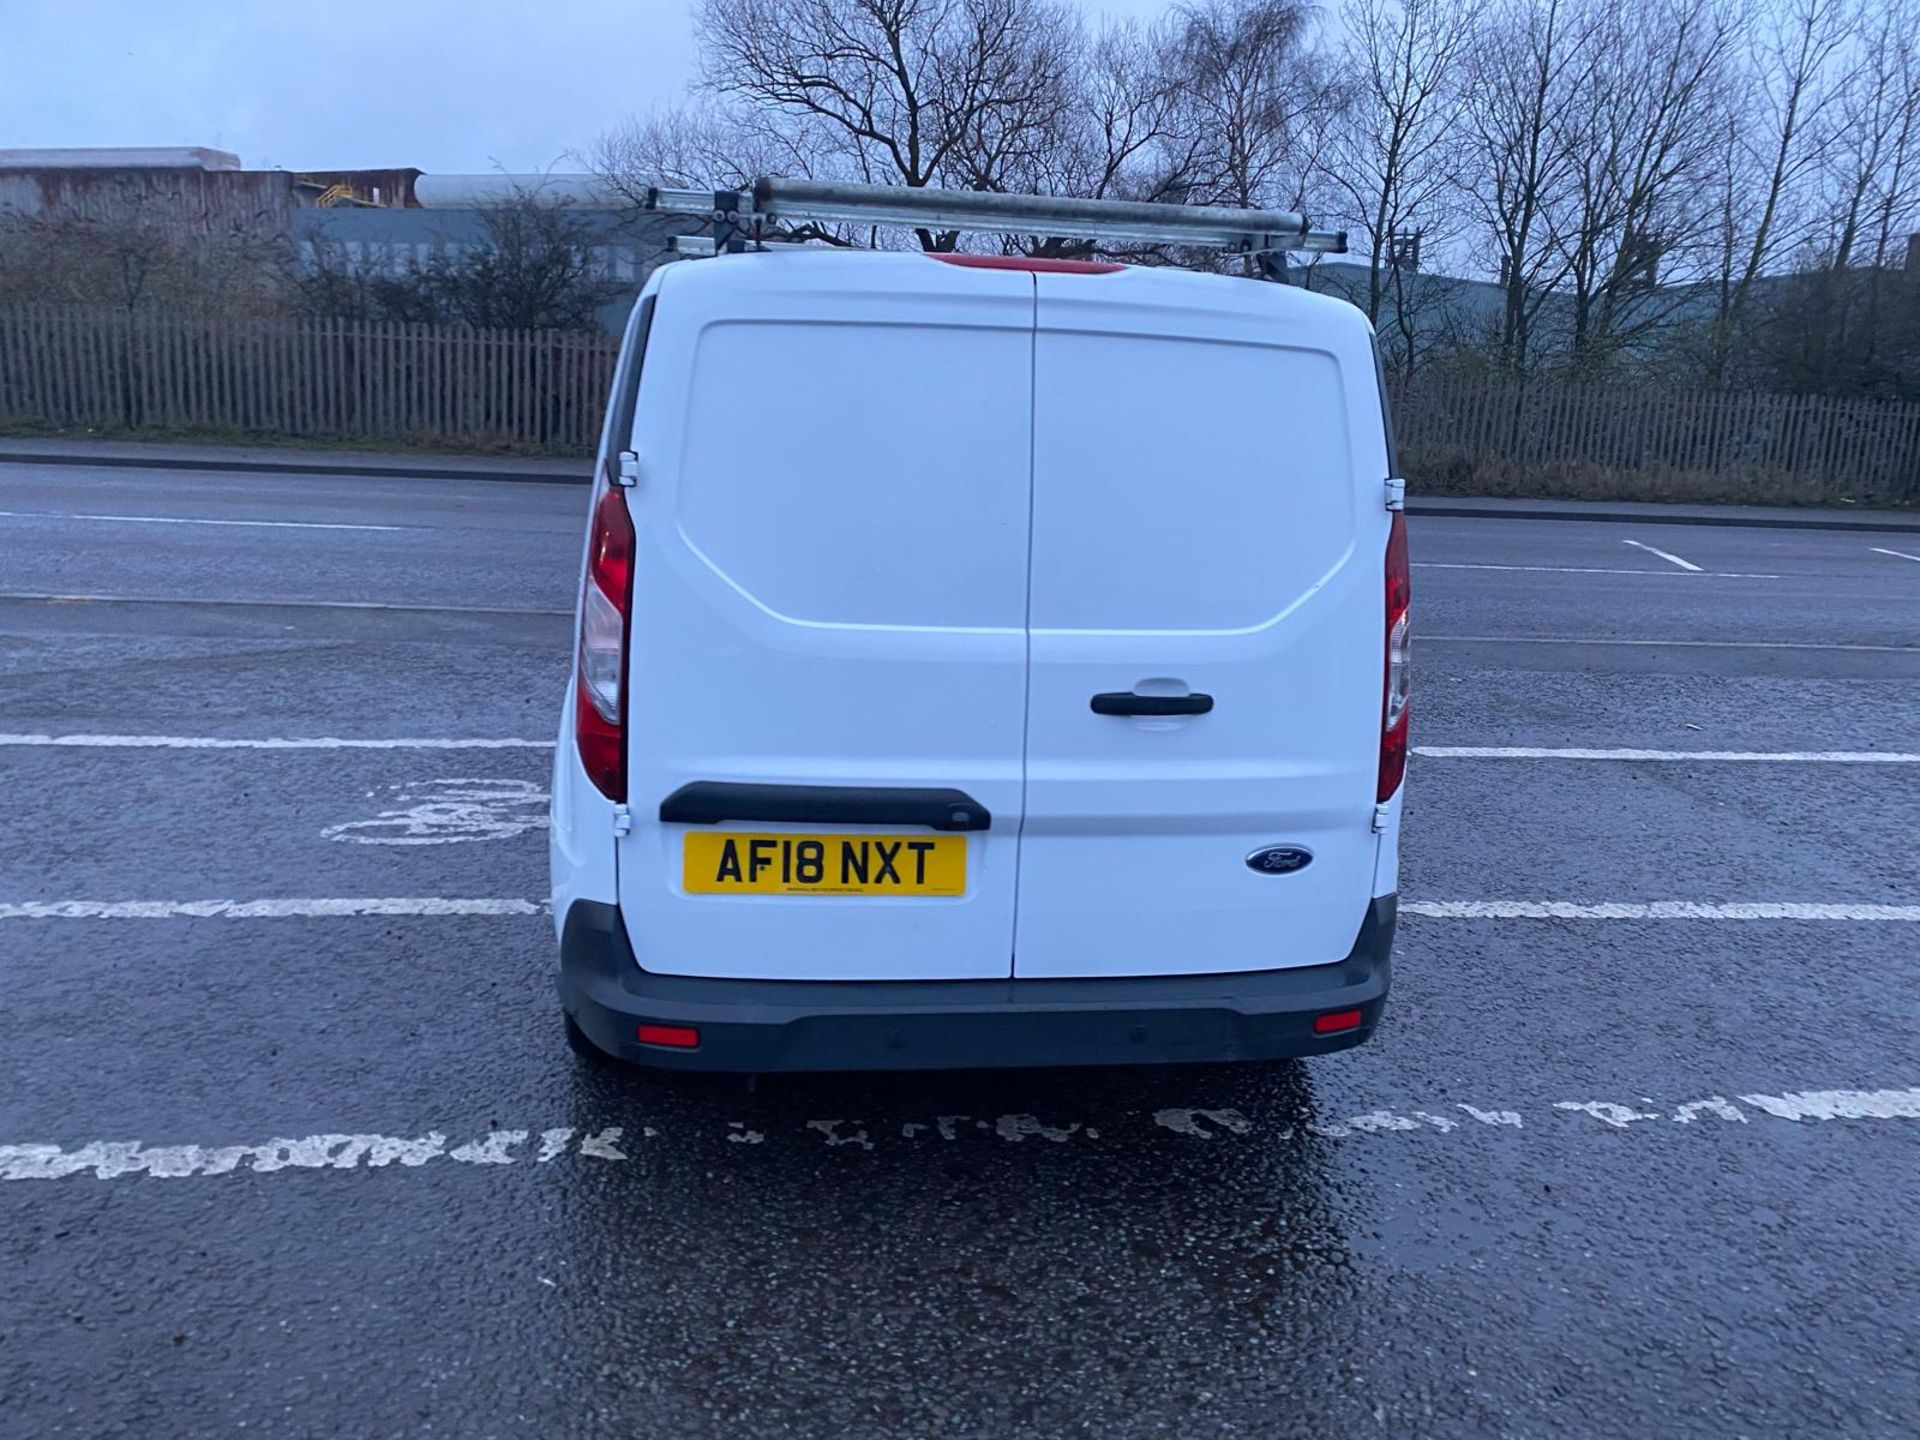 2018 18 FORD TRANSIT CONNECT TREND PAENL VAN - 128K MILES - EURO 6 - 3 SEATS - LWB - ROOF RACK. - Image 5 of 13